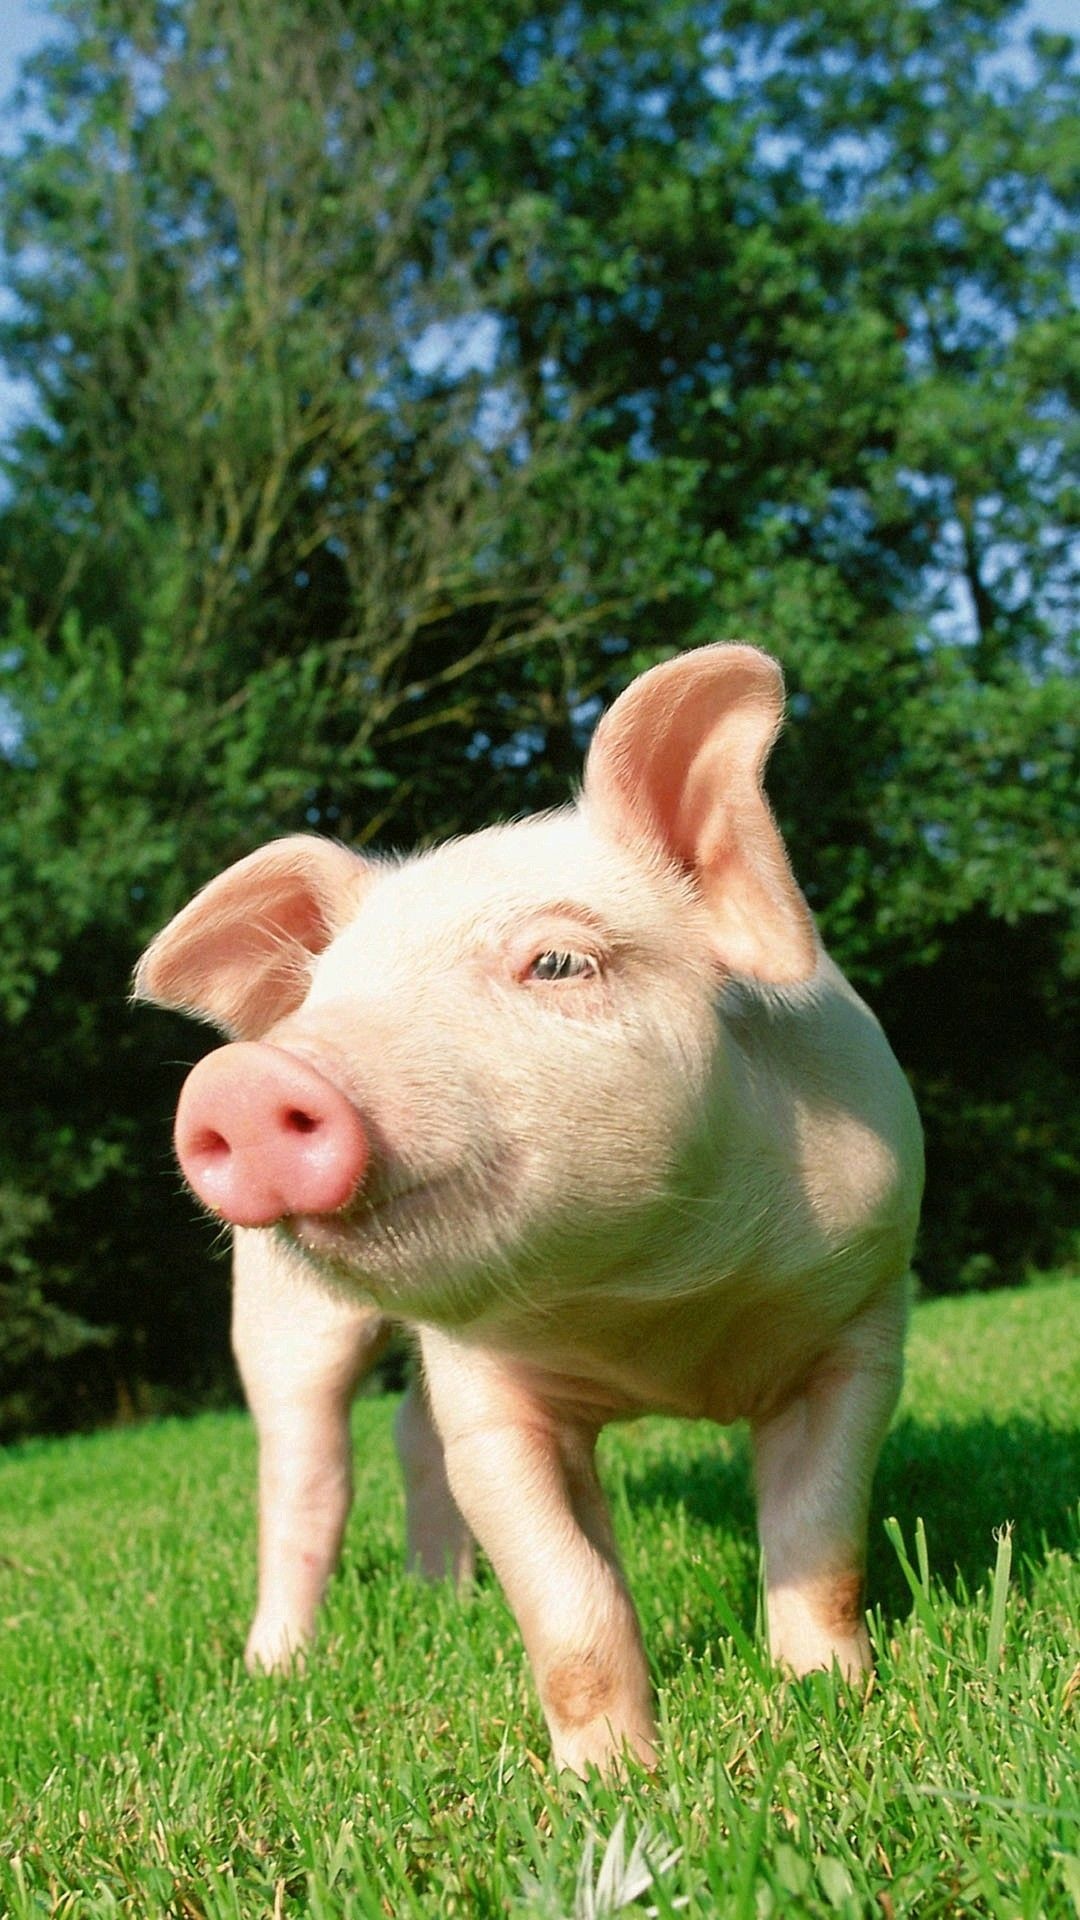 Cute pig wallpaper, Baby pigs delight, Charming snouts, Playful oinks, 1080x1920 Full HD Phone